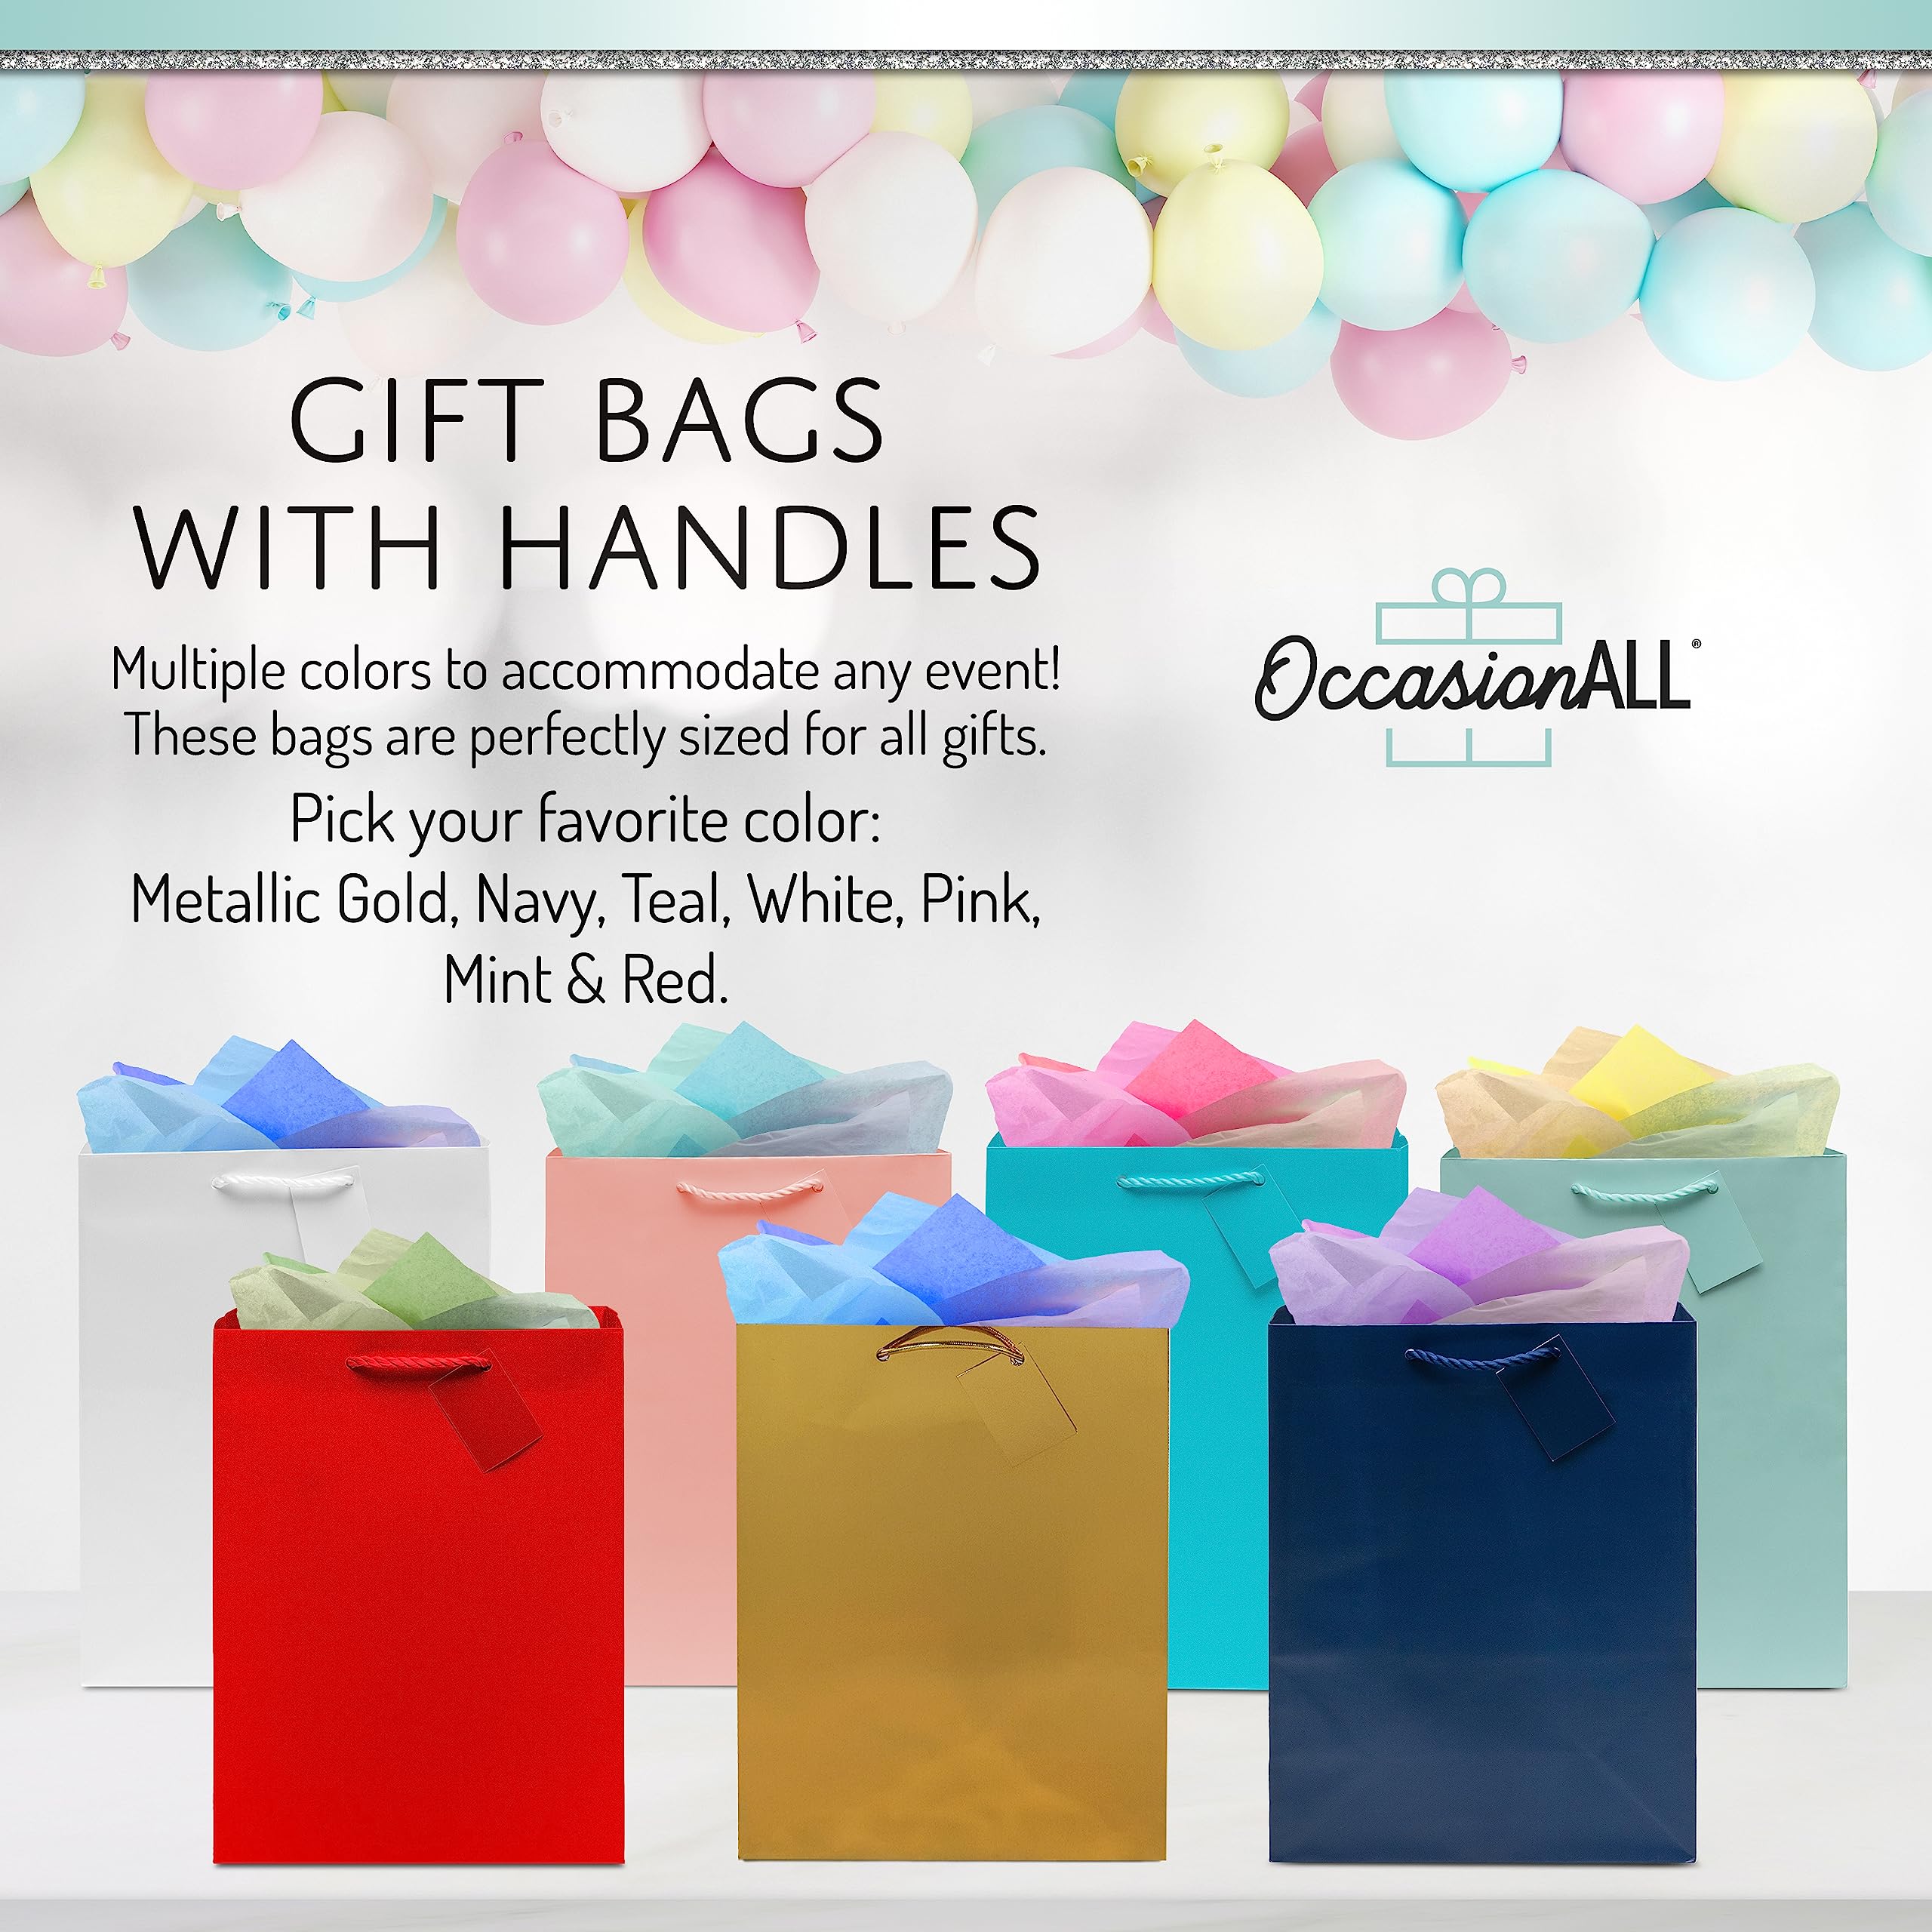 OccasionALL Assorted Color Foil Gift Bags  - Good